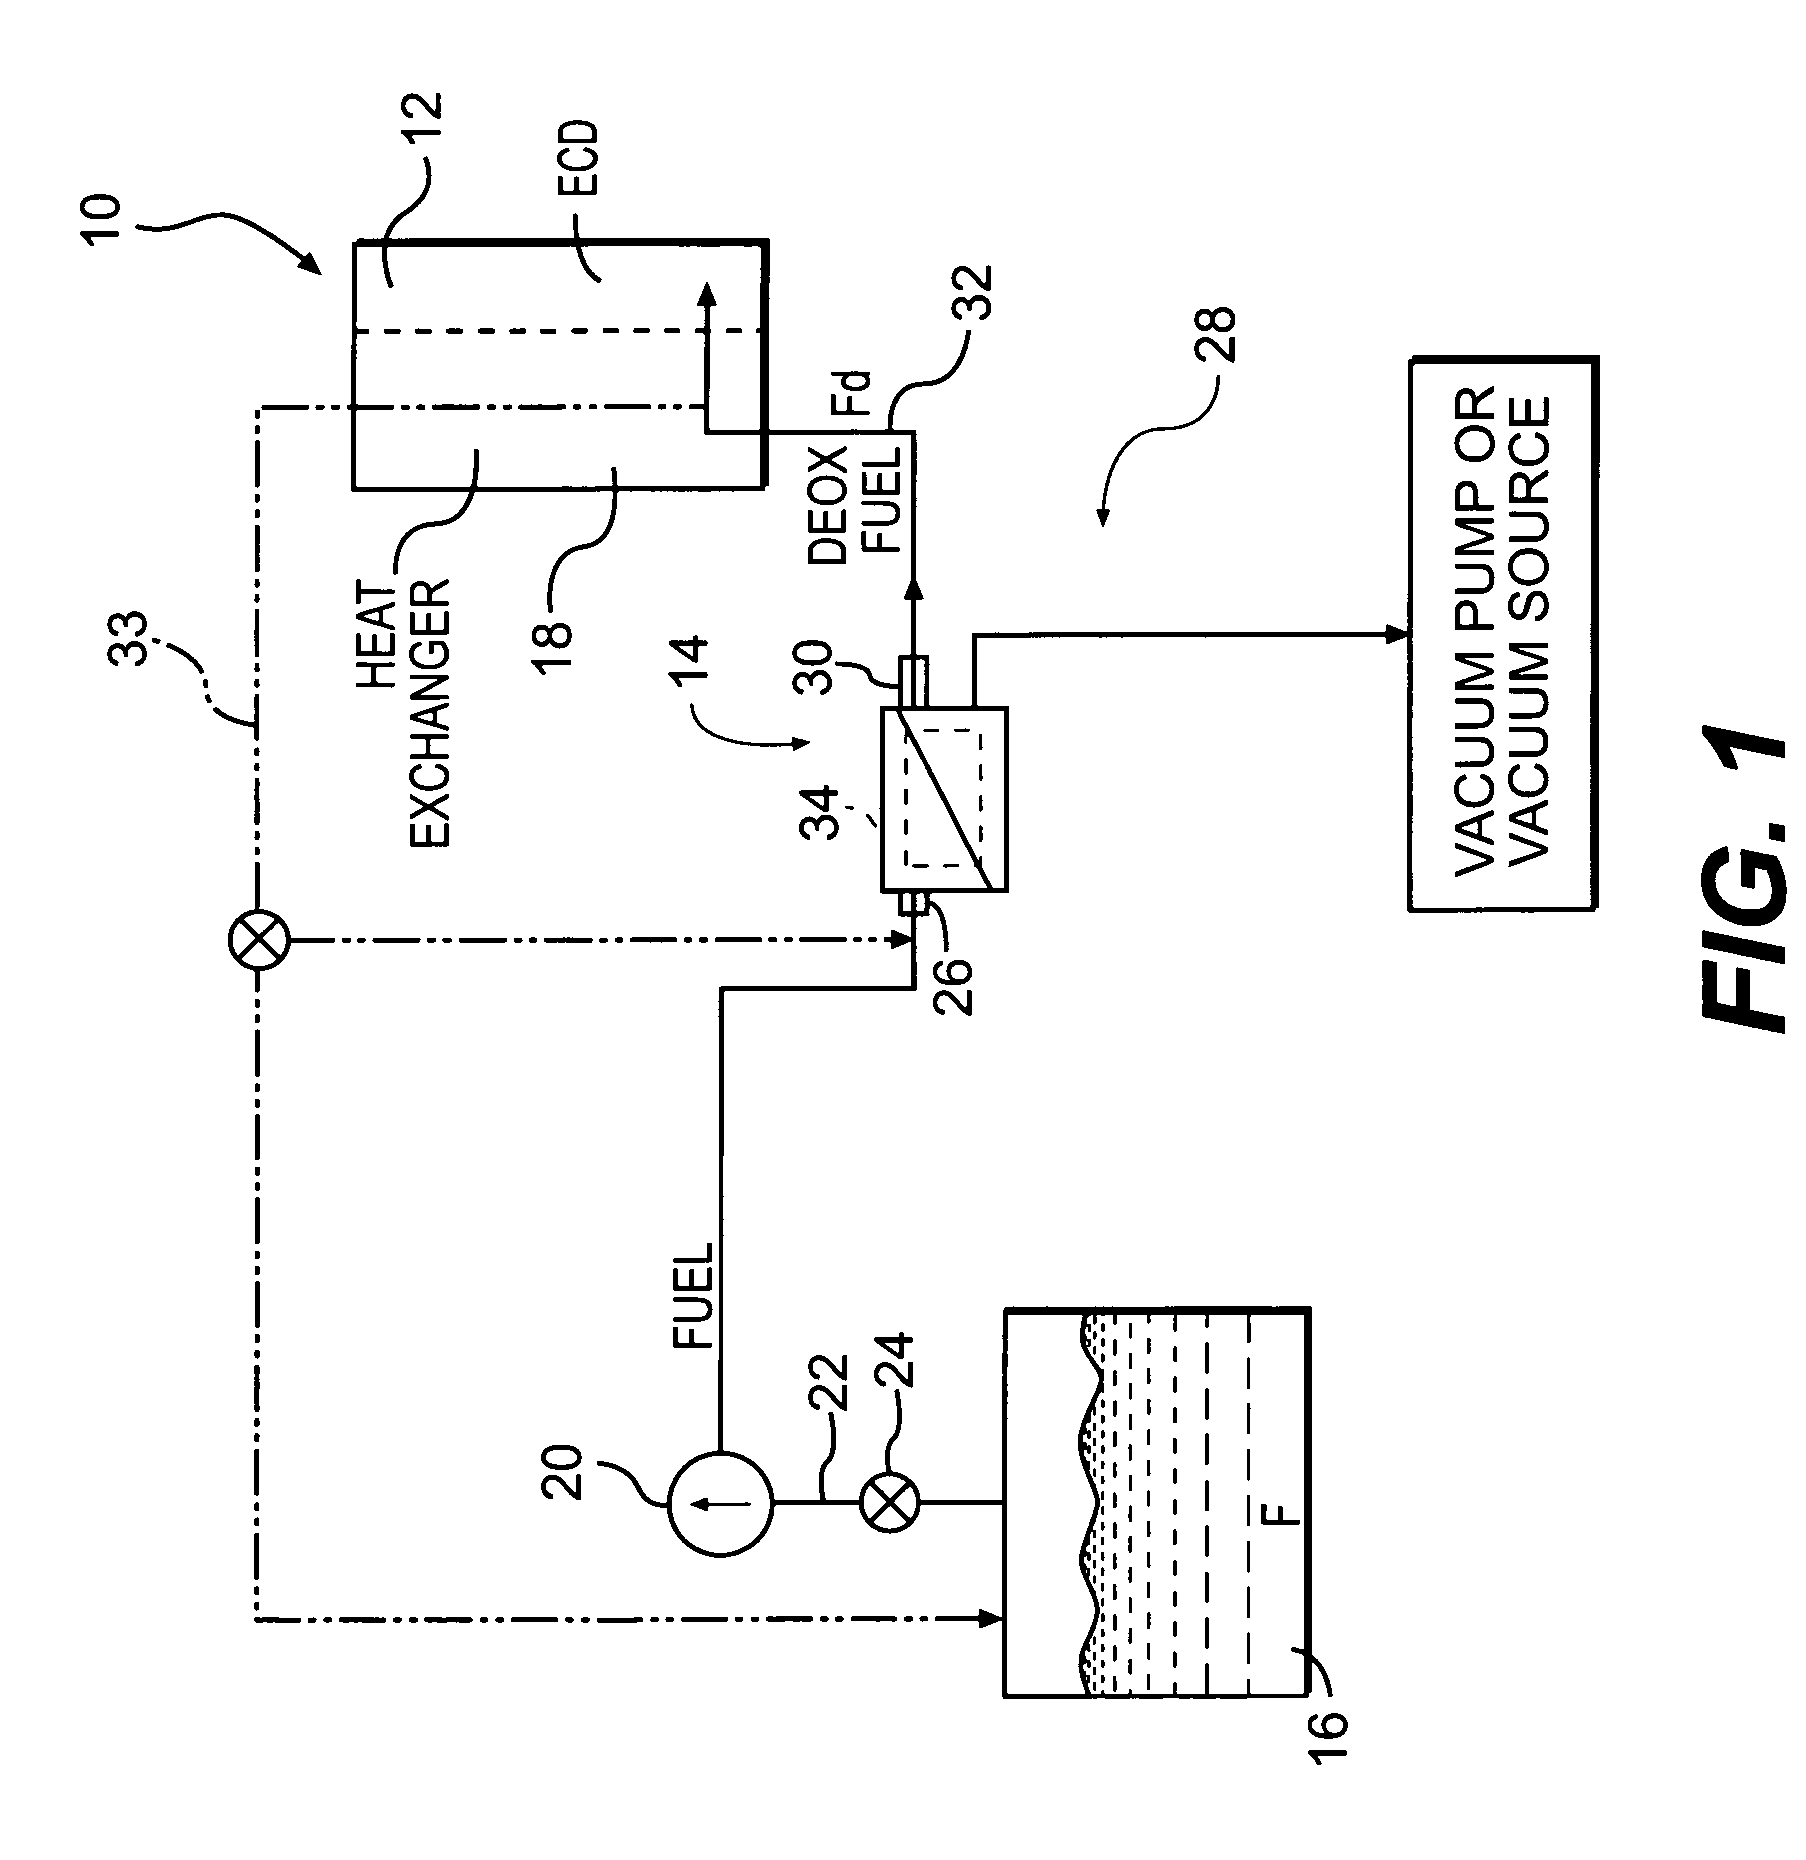 Fuel deoxygenation system with non-metallic fuel plate assembly